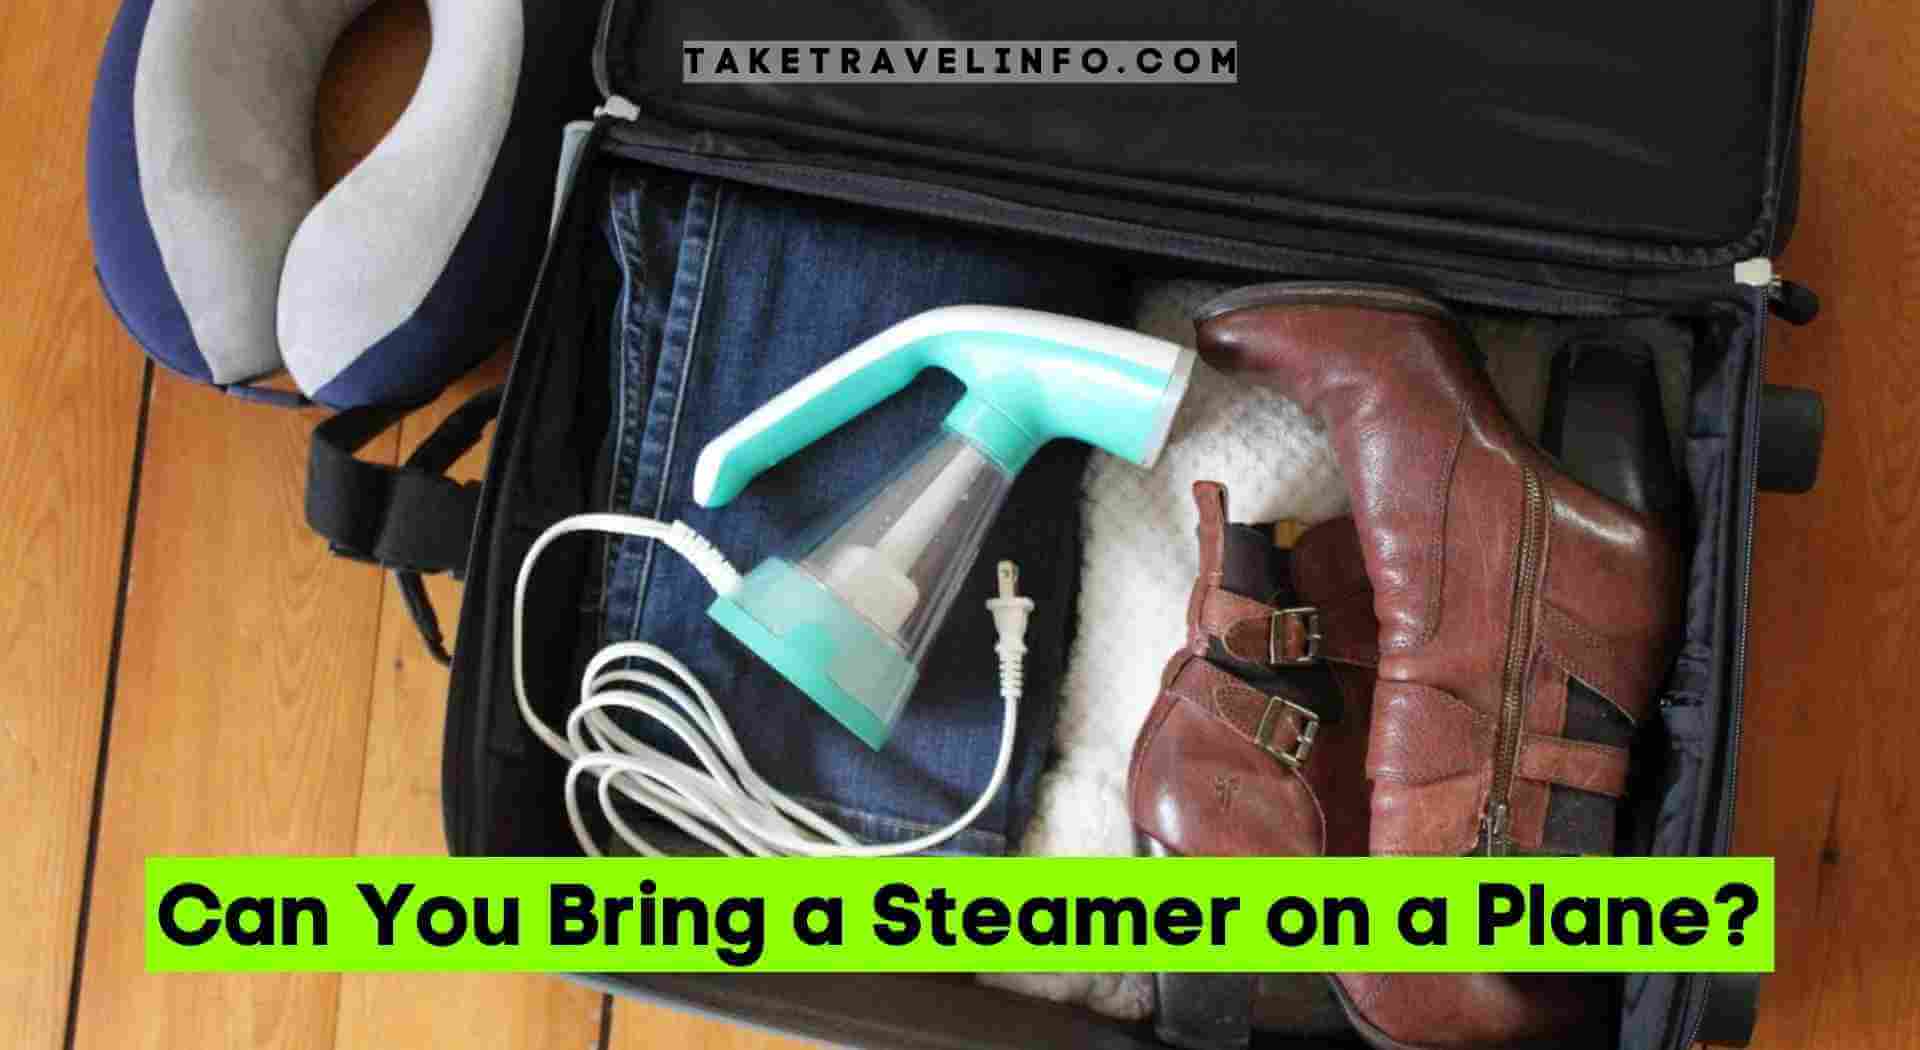 Can You Bring a Steamer on a Plane?